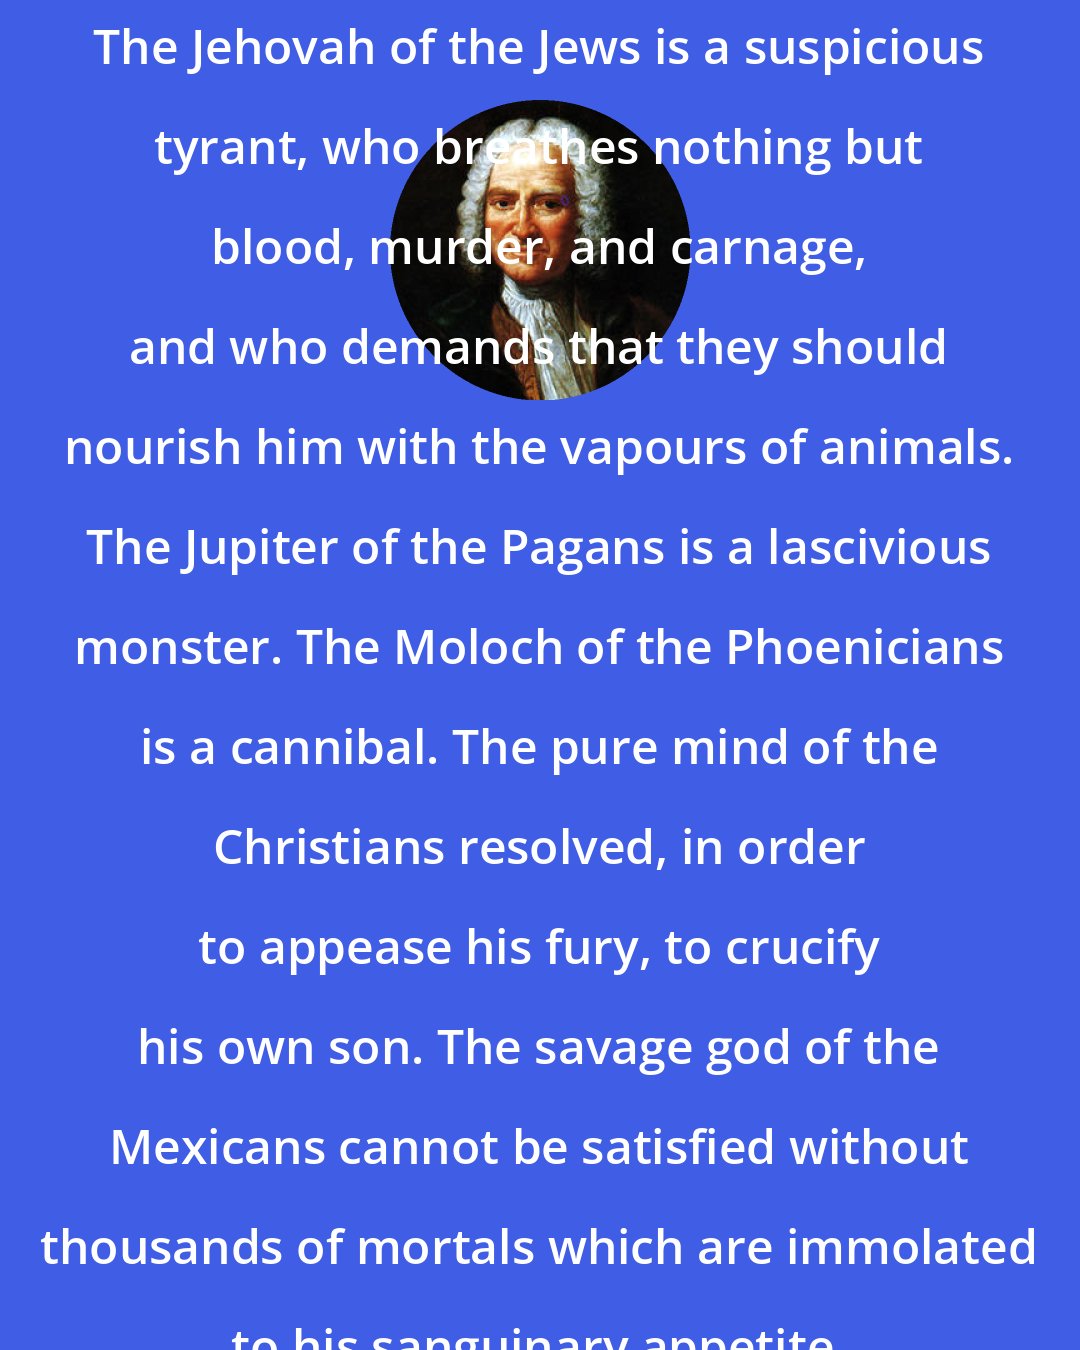 Baron d'Holbach: The Jehovah of the Jews is a suspicious tyrant, who breathes nothing but blood, murder, and carnage, and who demands that they should nourish him with the vapours of animals. The Jupiter of the Pagans is a lascivious monster. The Moloch of the Phoenicians is a cannibal. The pure mind of the Christians resolved, in order to appease his fury, to crucify his own son. The savage god of the Mexicans cannot be satisfied without thousands of mortals which are immolated to his sanguinary appetite.